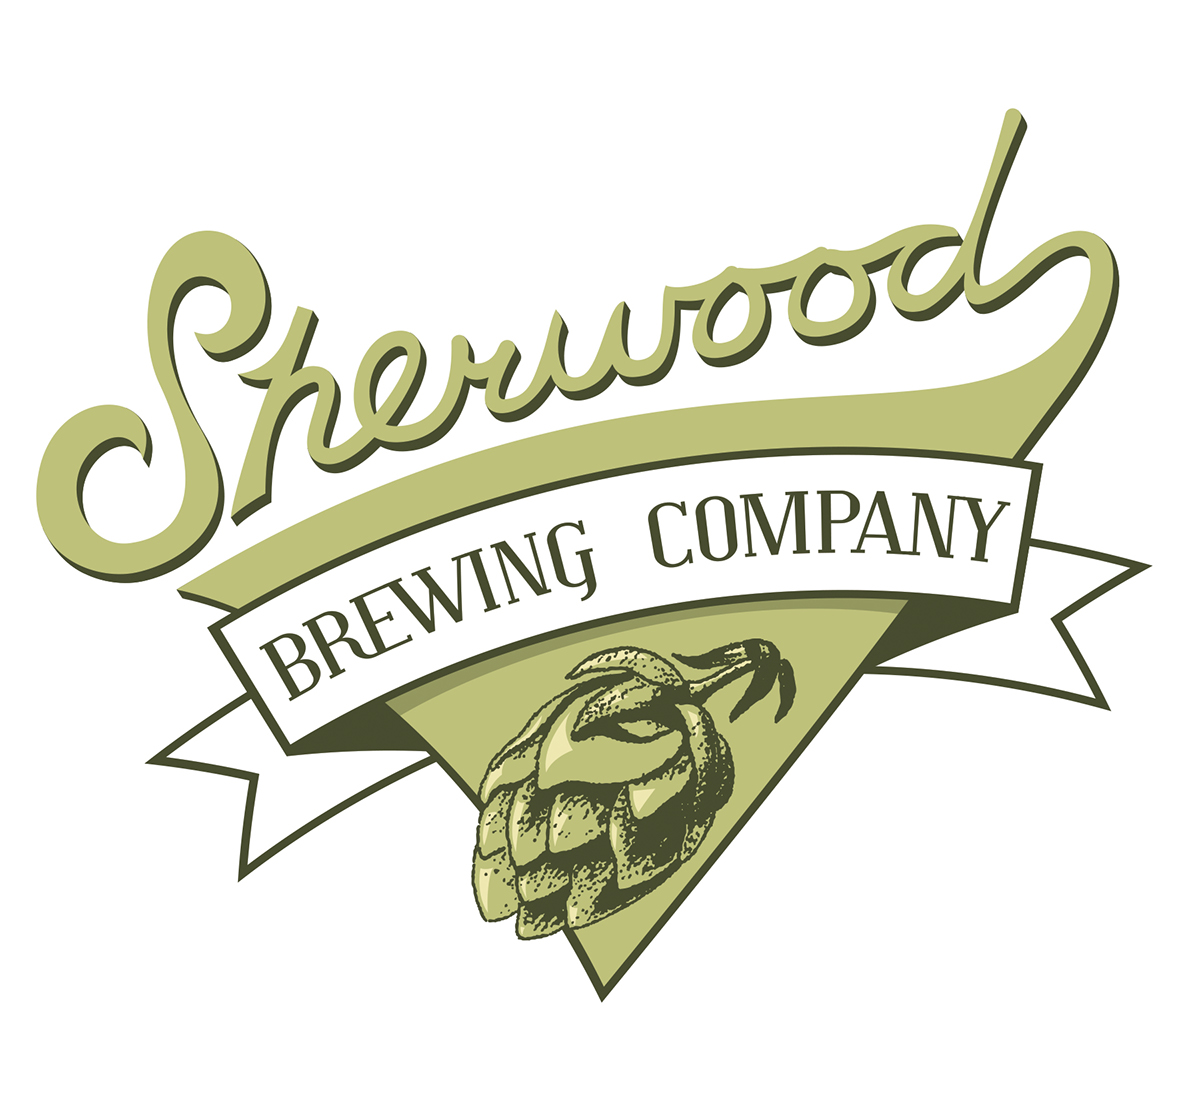 beer brewery sherwood ebroidery logo pinup vector mallet chef menu